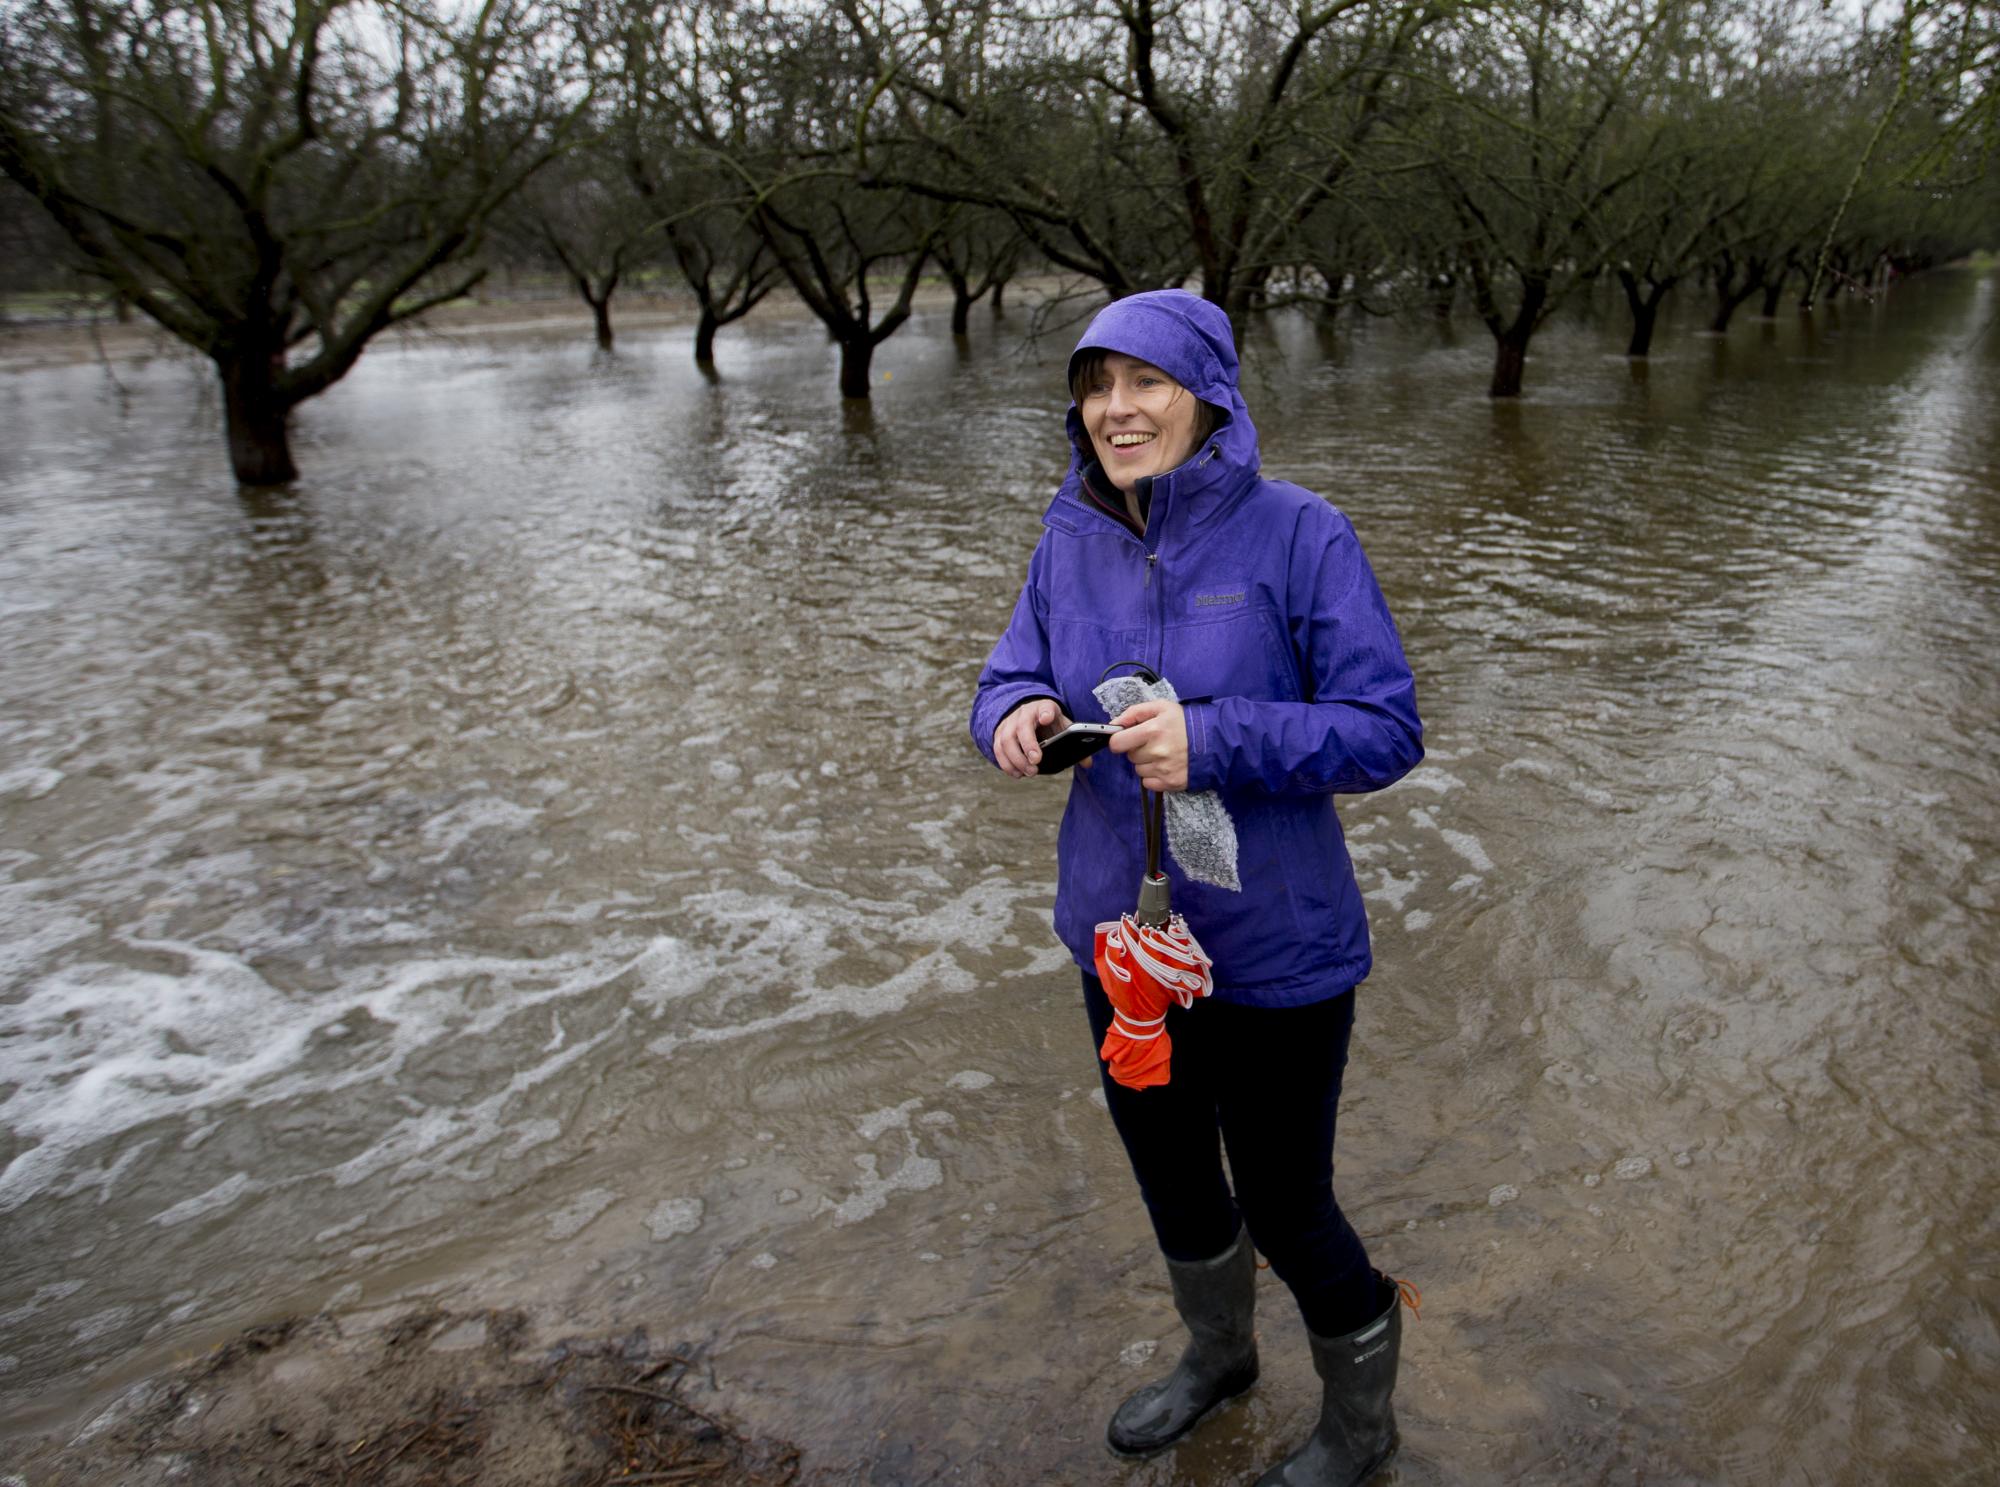 Female scientists in almond orchard being flooded for groundwater research.